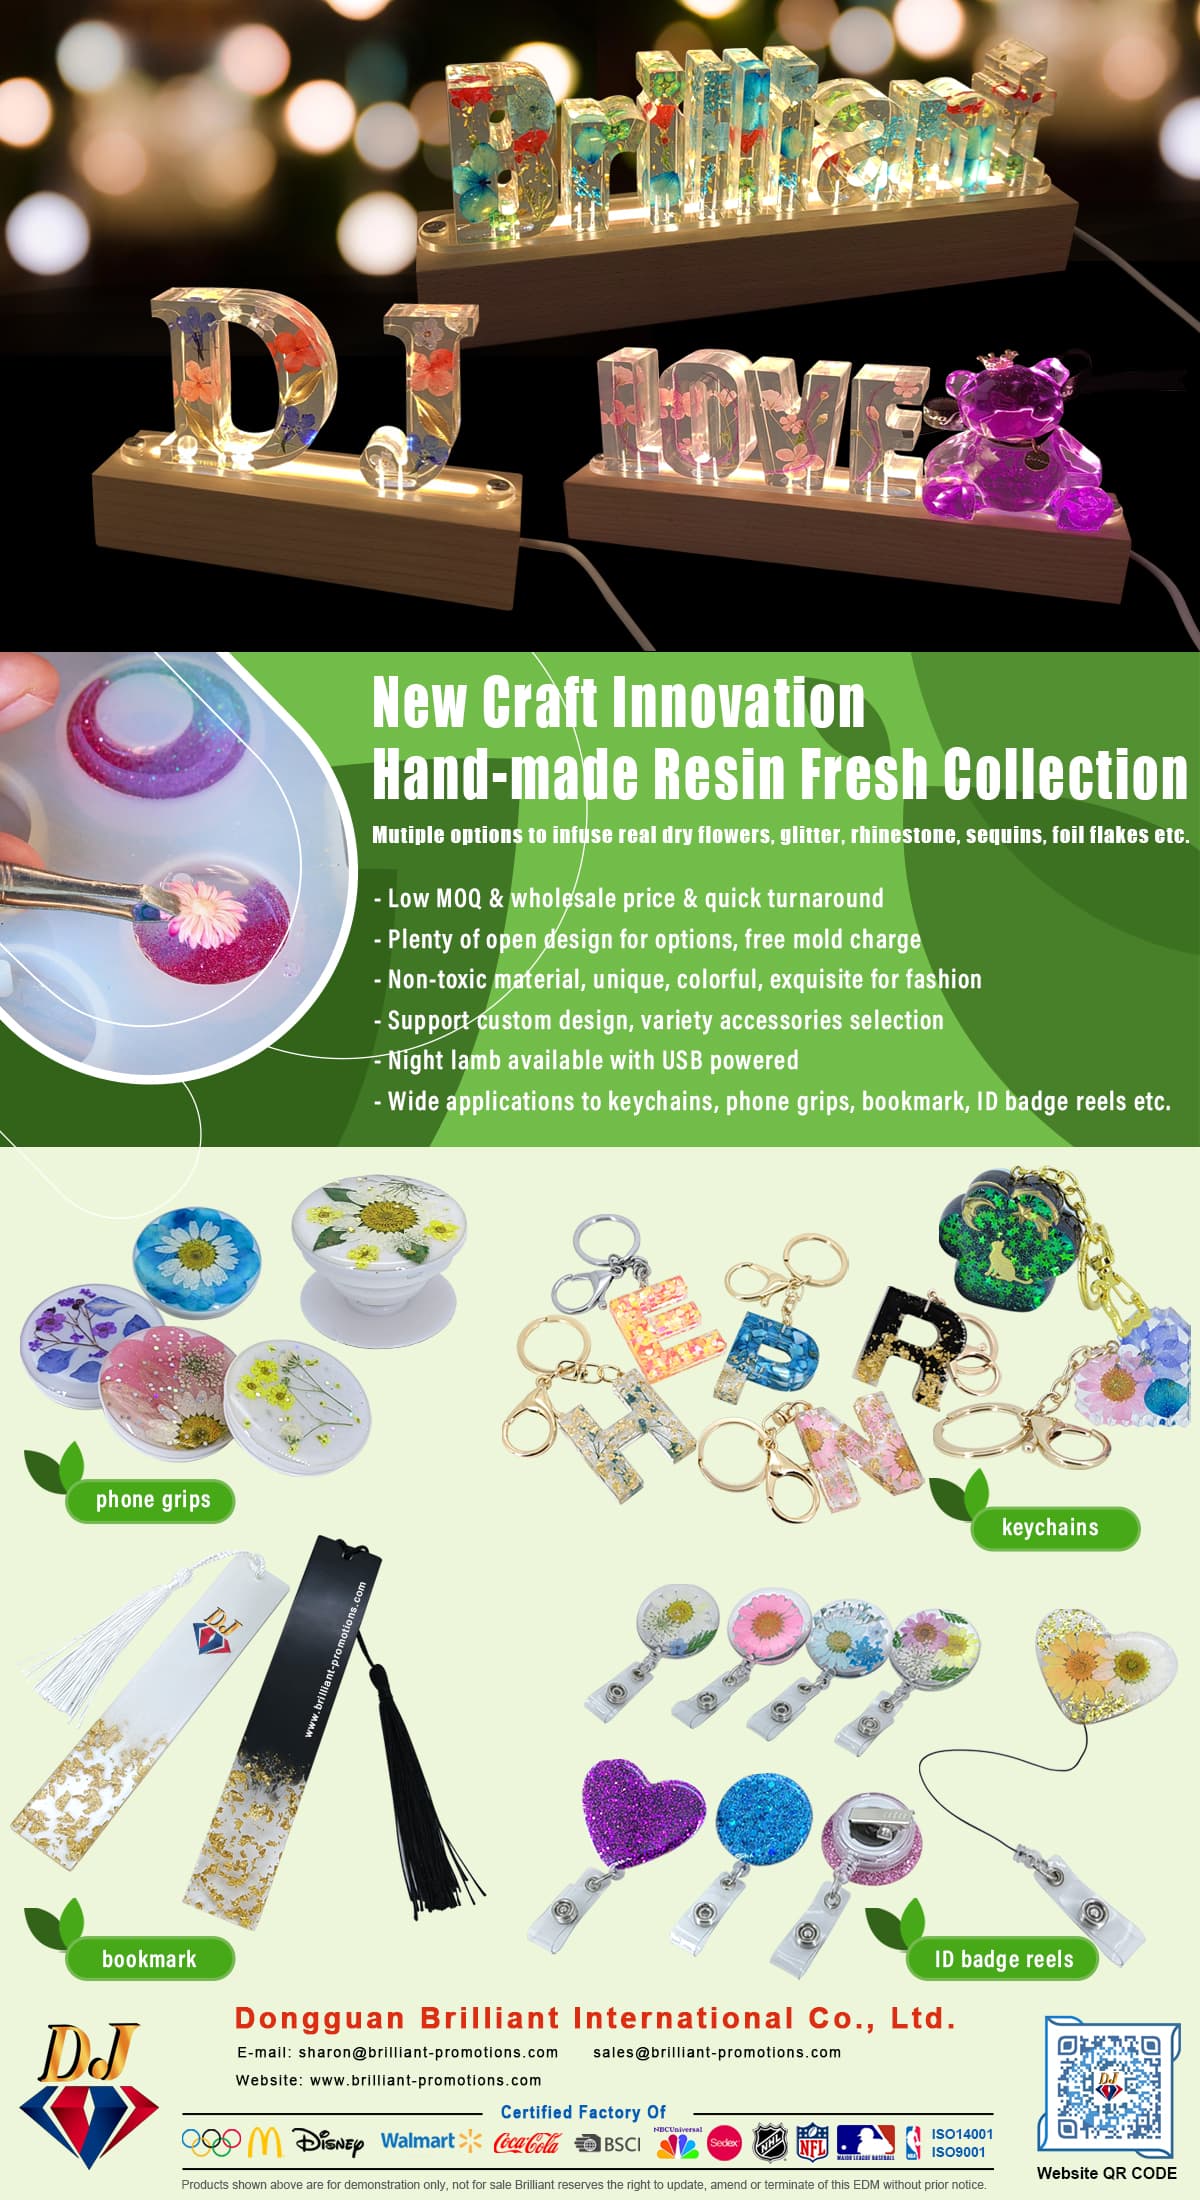 New Craft Innovation-Hand-made Resin Fresh Collection | Brilliant